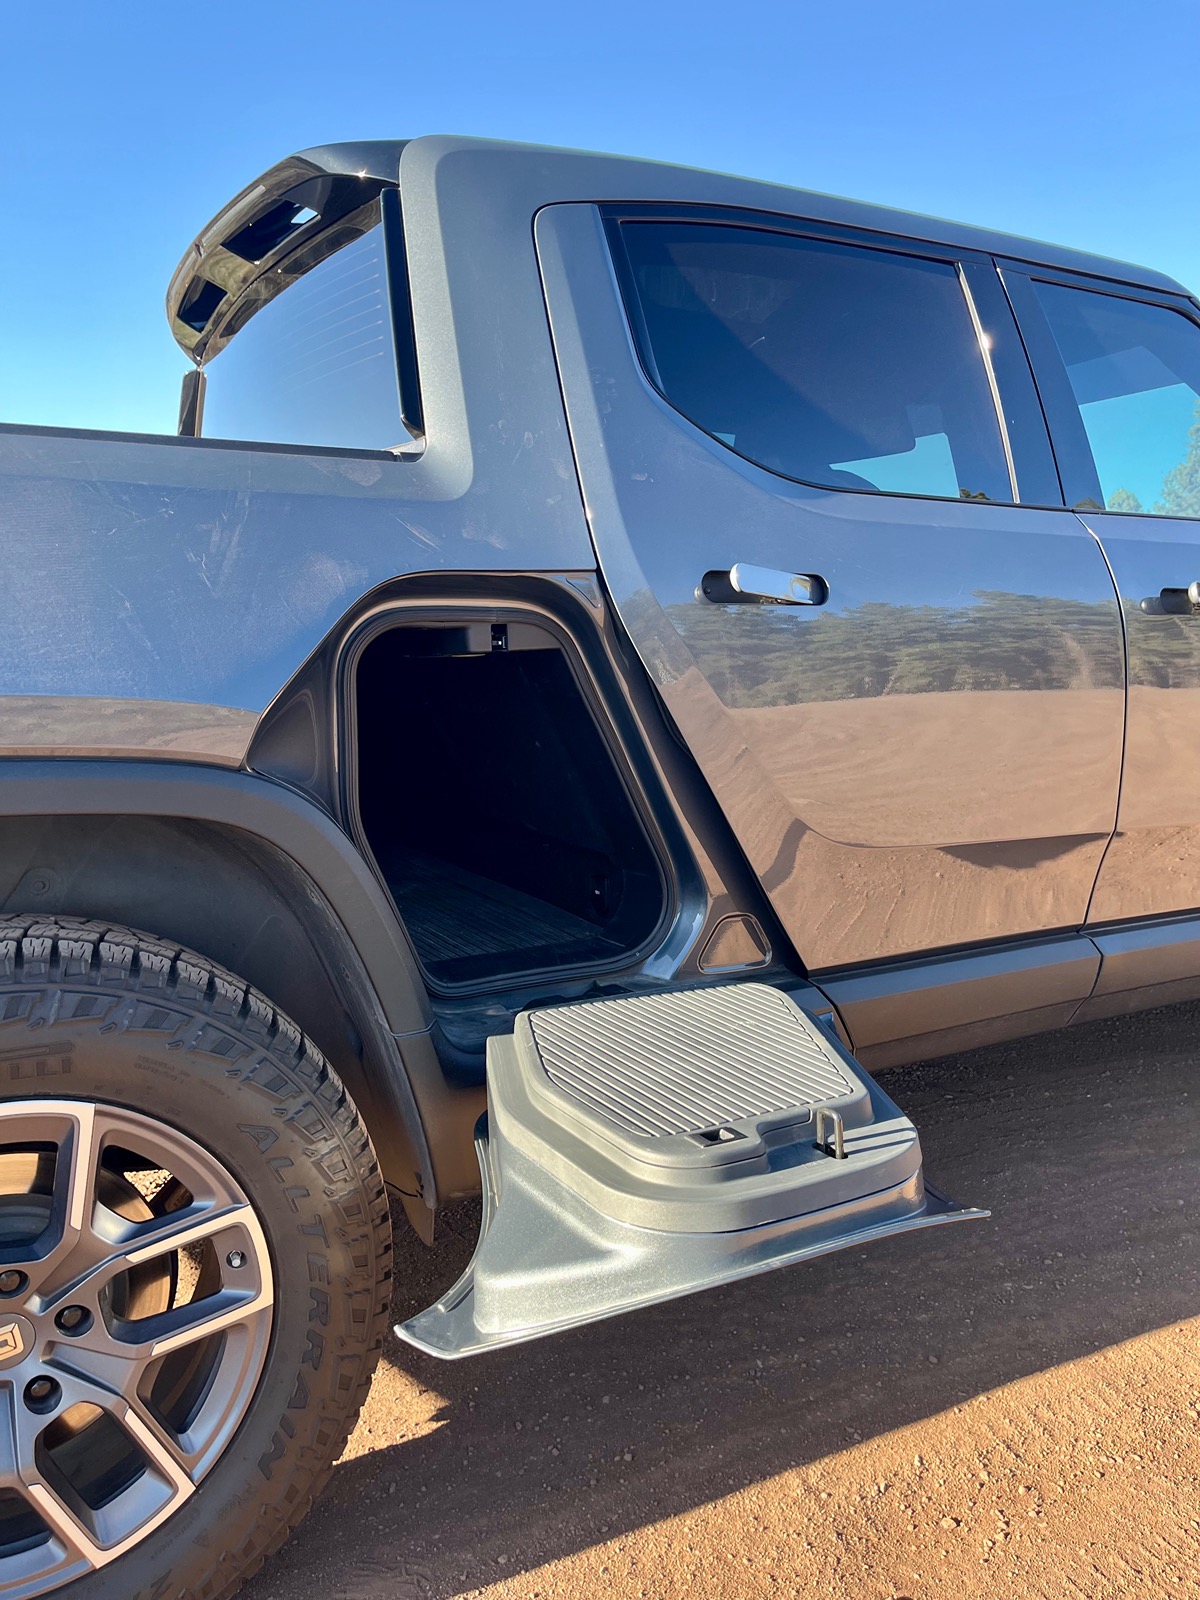 Rivian R1T R1S FOR SALE: 22 R1T LE - El Cap - Quad Motor - Lrg Pack - 20" AT - 39k mi - Off Road Pkg - Lots of Accessories and Aftermarket Upgrades - $60K IMG_6903